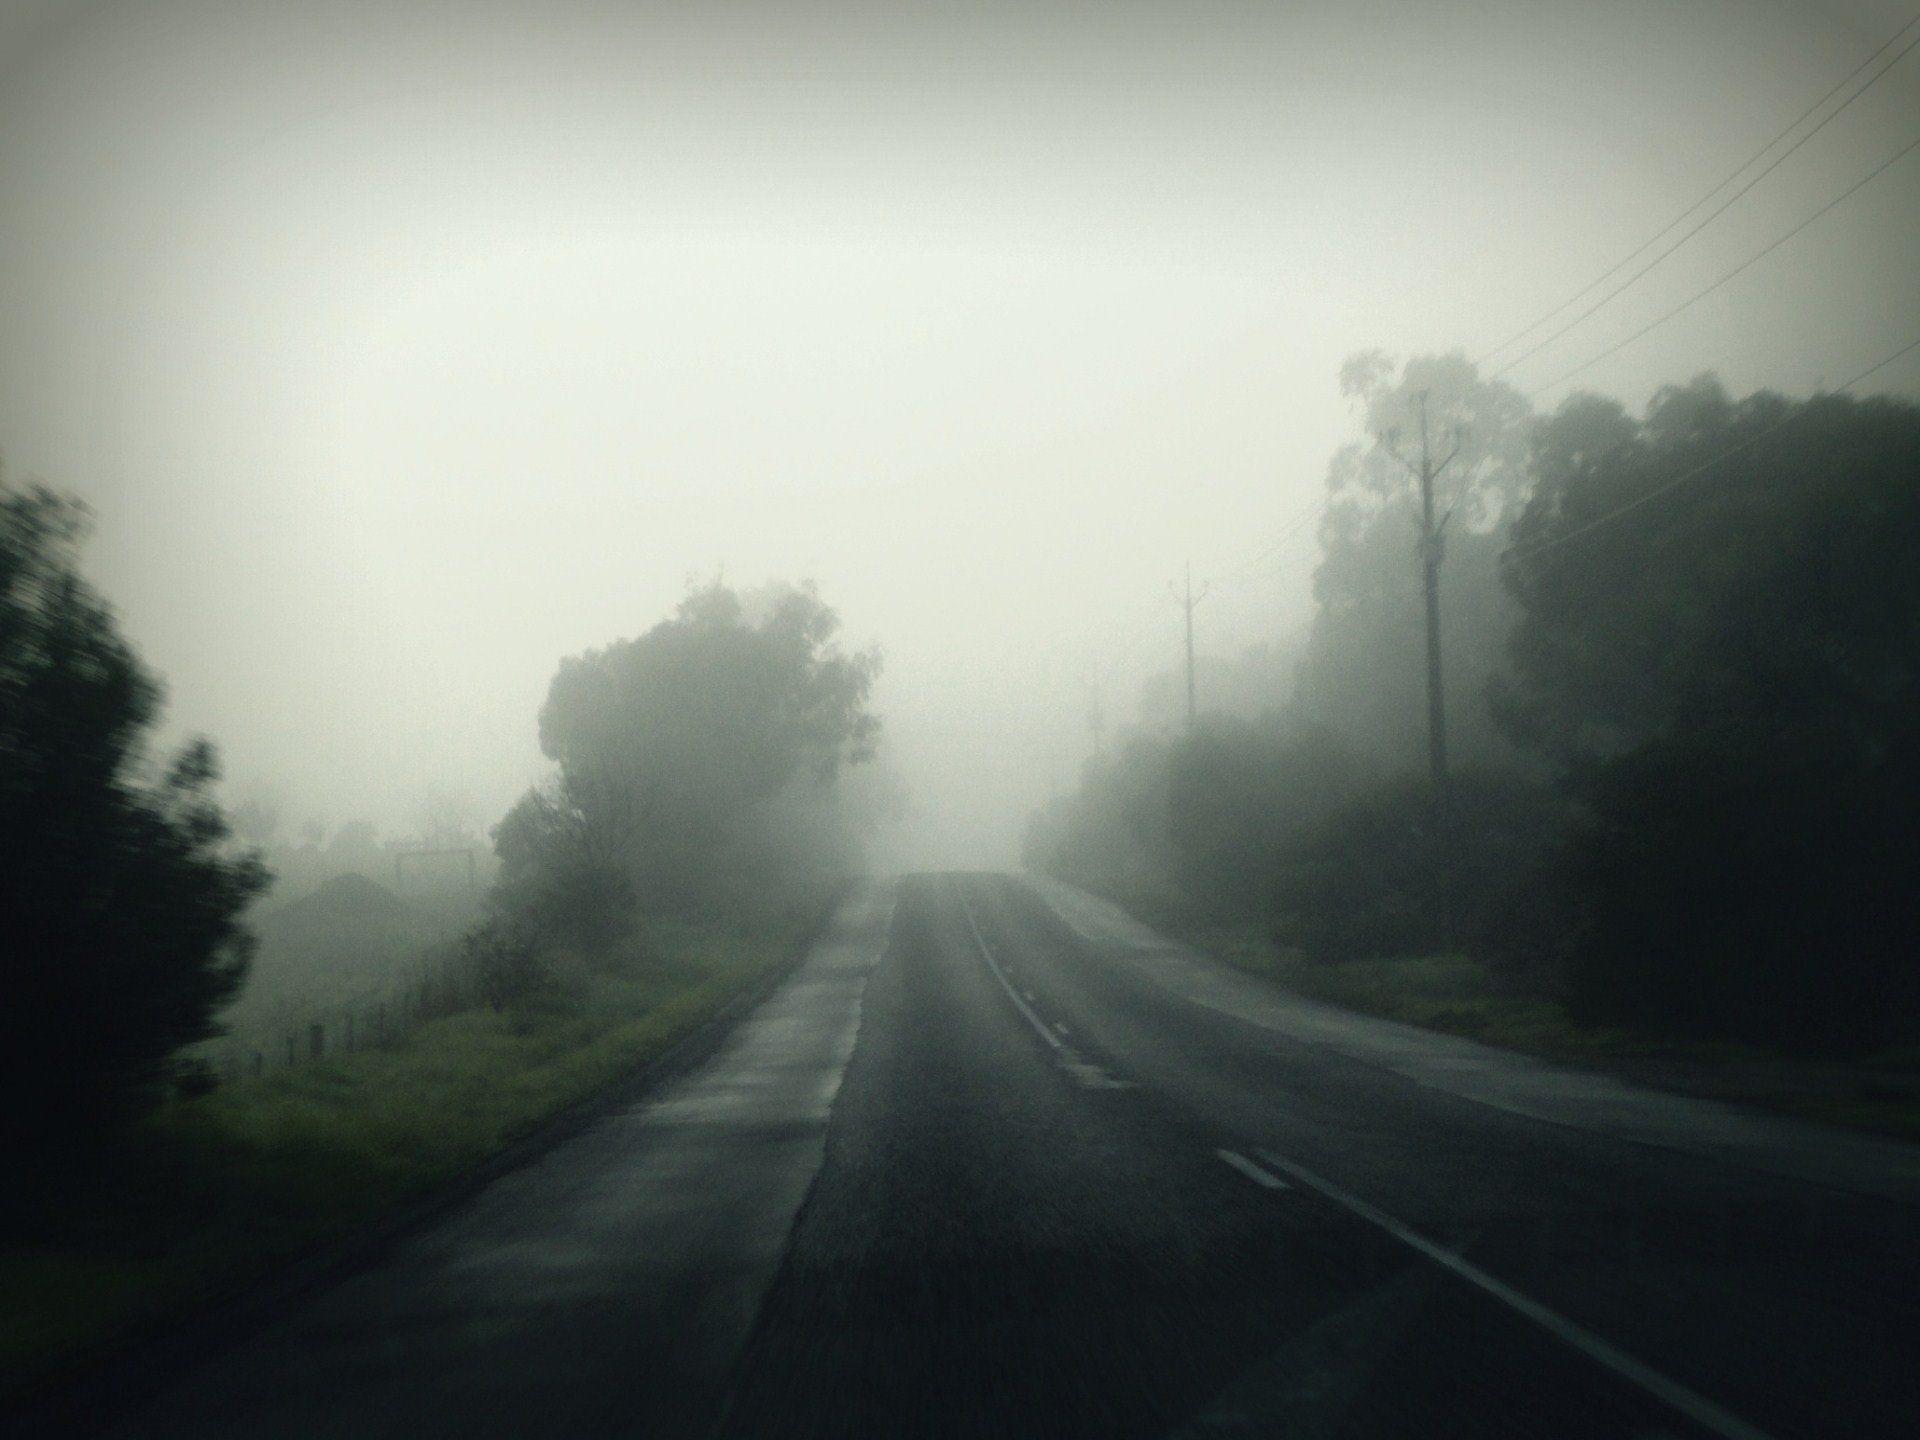 Silent Hill Background